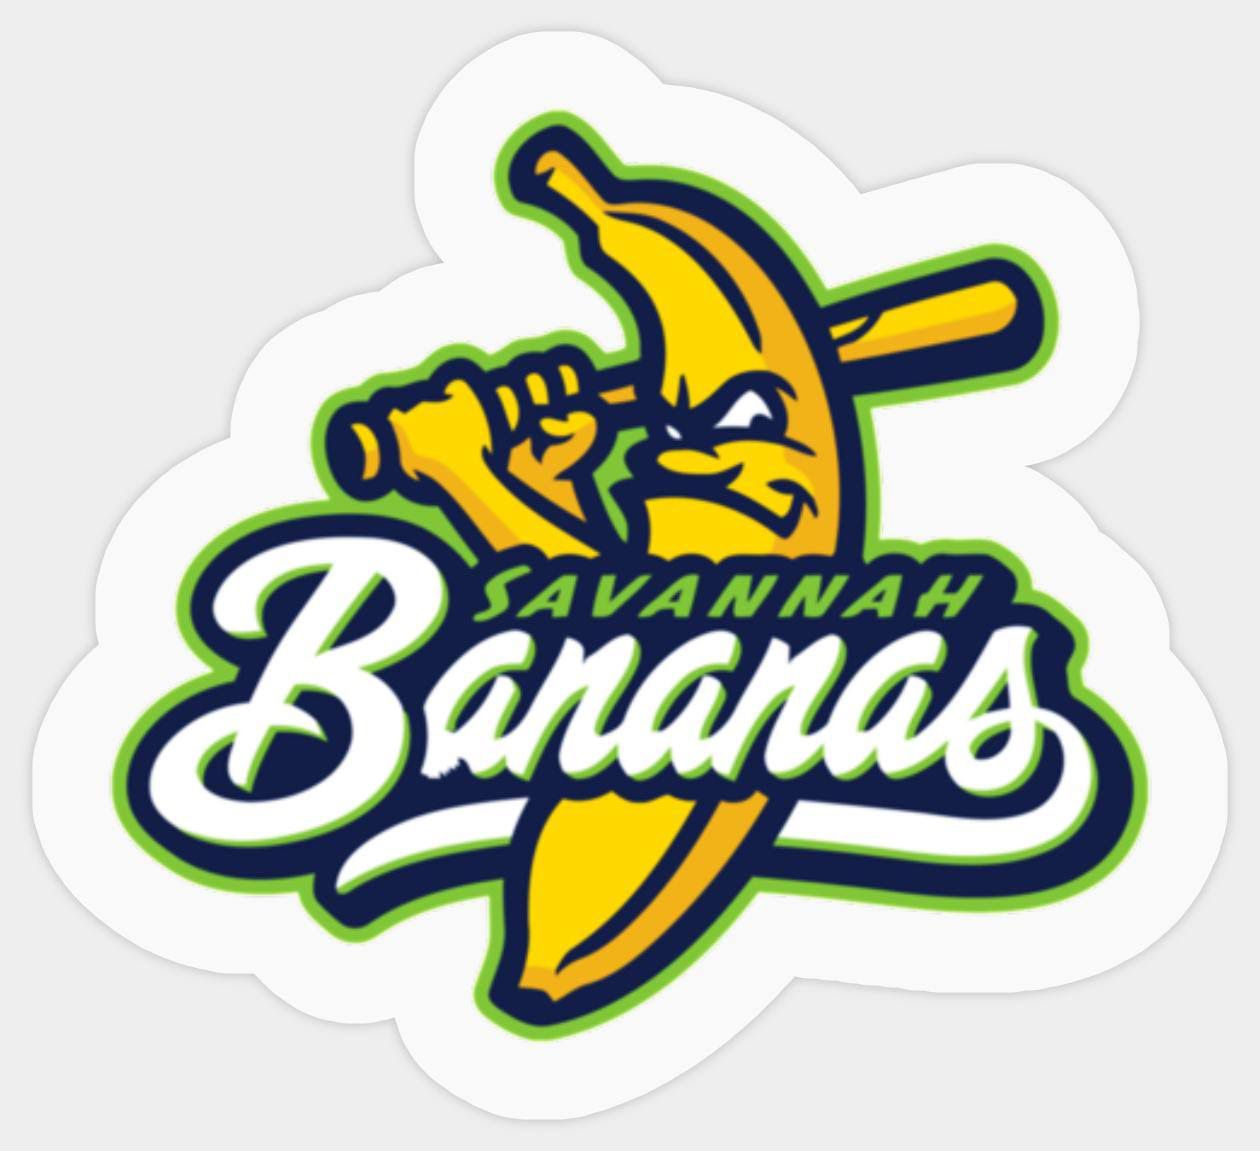 4 Outfield General Admission tickets to the 4/1 Savanah Bananas game in Peoria. $130/each 